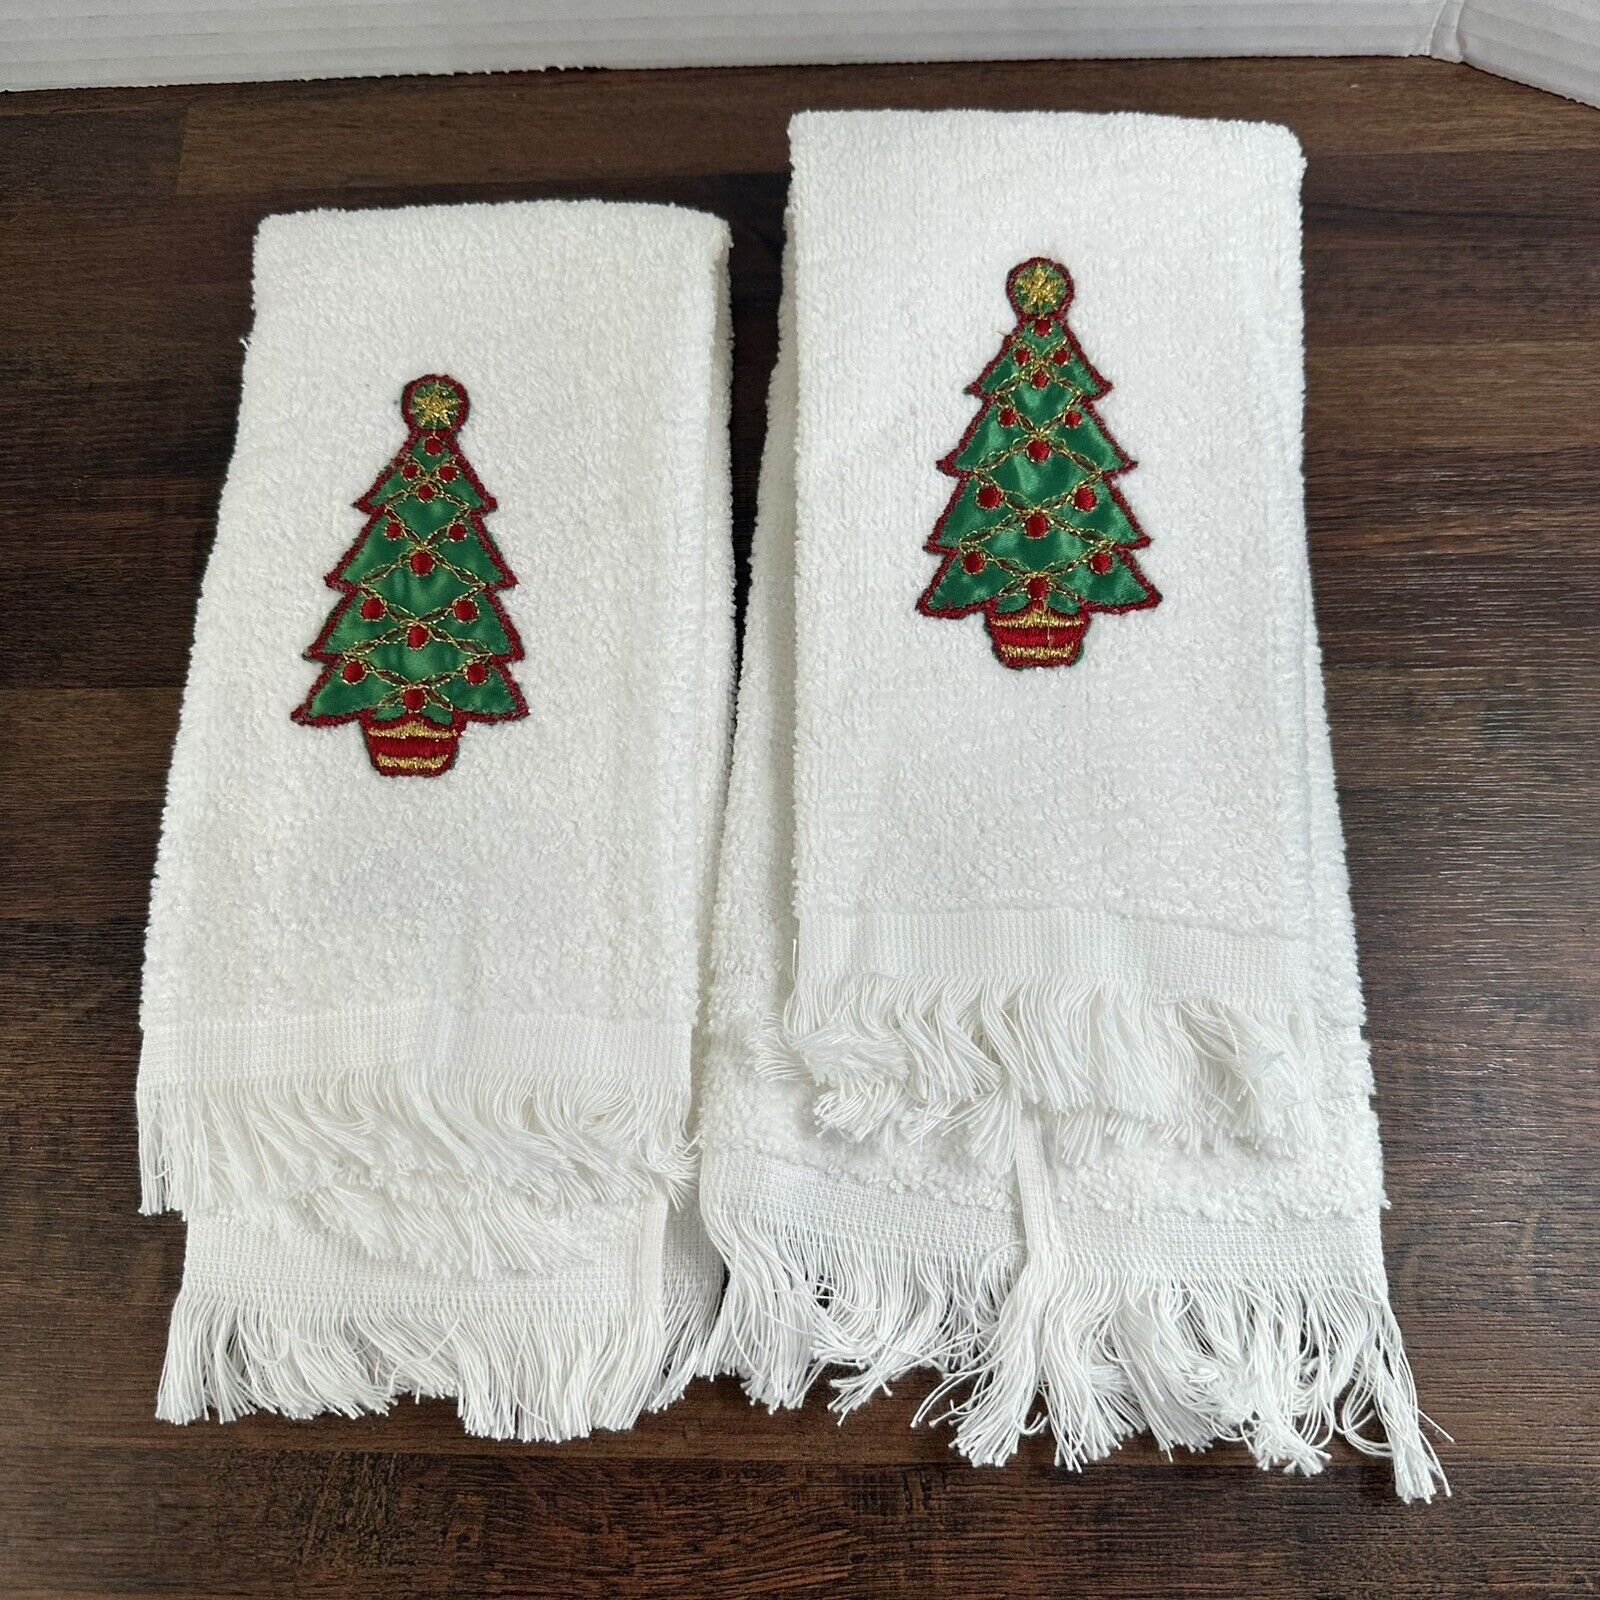 2 VINTAGE FINGERTIP TOWELS EMBROIDERED Christmas Trees COTTON USA